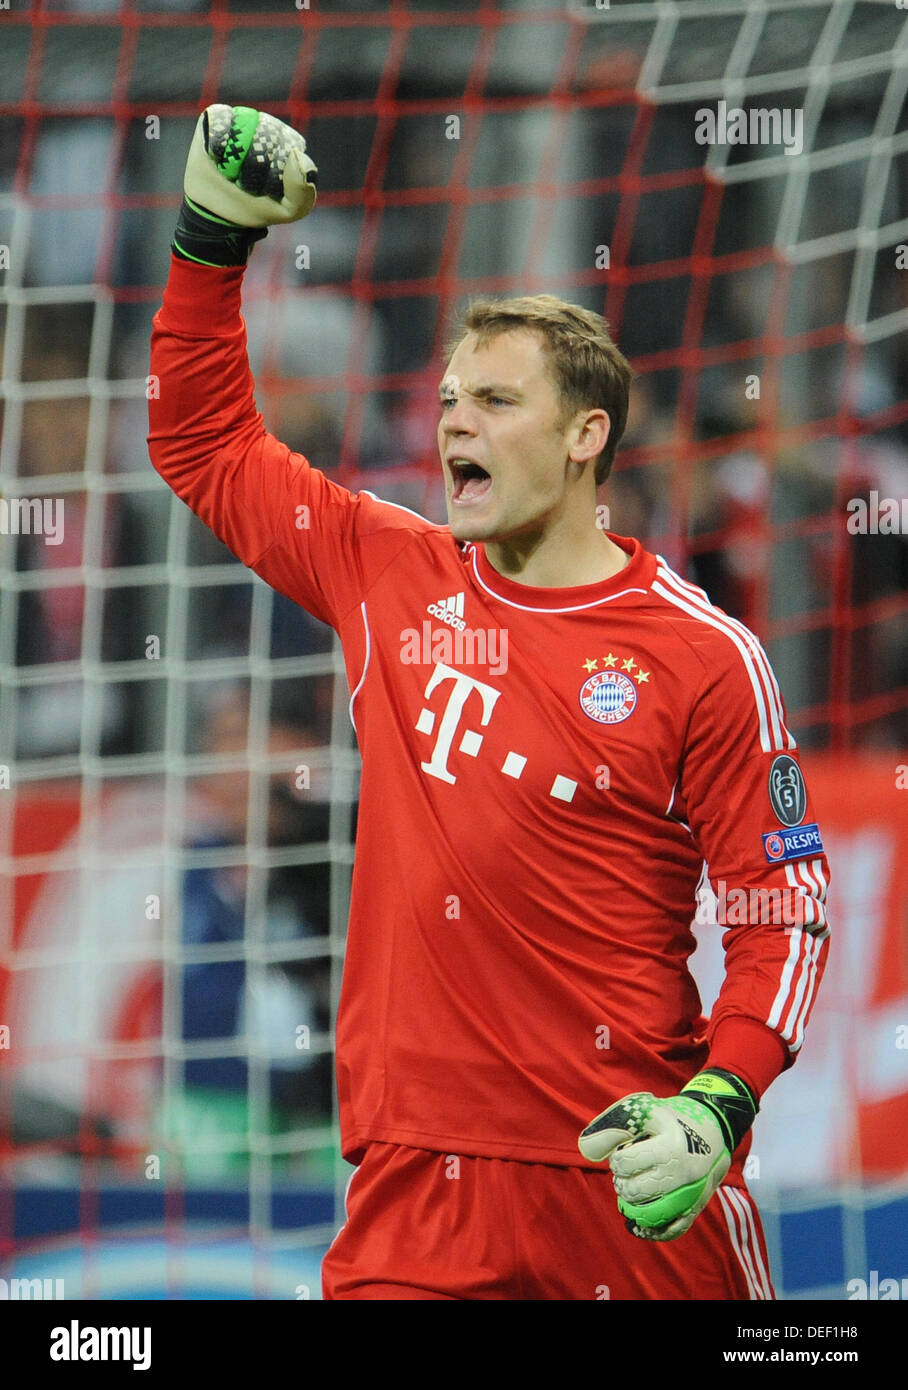 Munich, Germany. 17th Sep, 2013. Munich's goalkeeper Manuel Neuer gestures during the UEFA Champions League Group D soccer match between FC Bayern Munich and CSKA Moscow at München Arena in Munich, Germany, 17 September 2013. Photo: Andreas Gebert/dpa/Alamy Live News Stock Photo